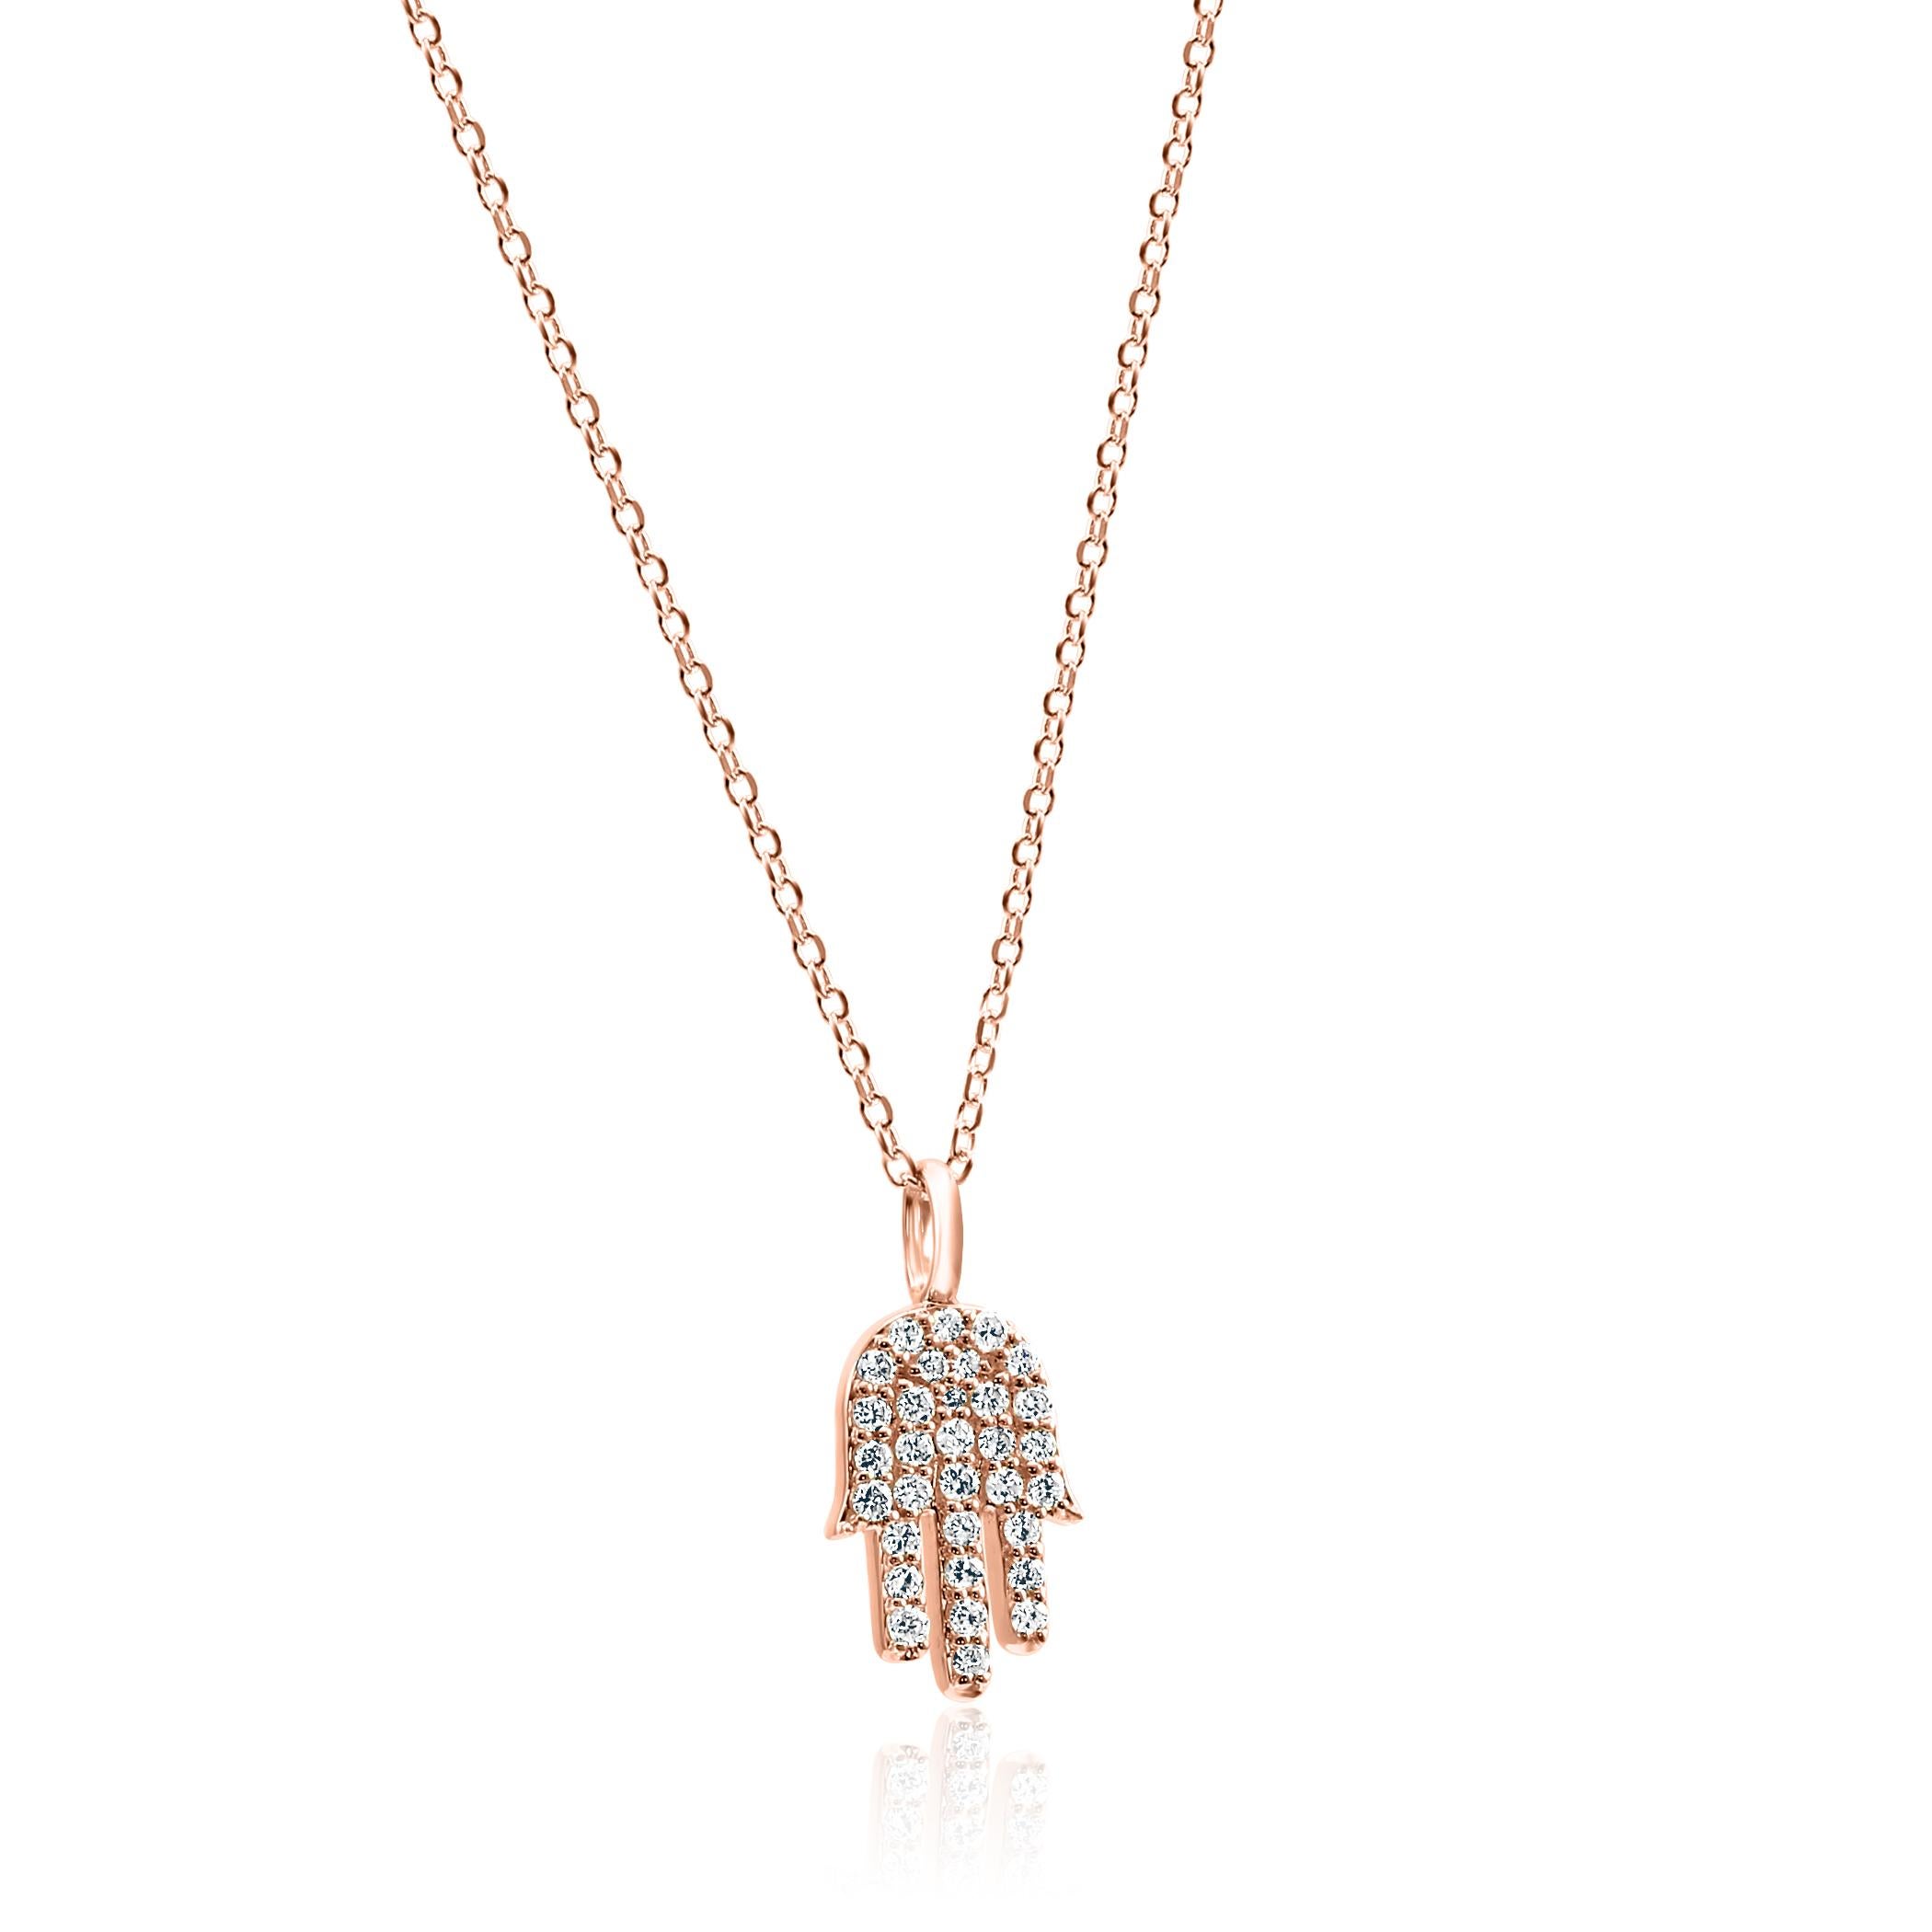 Embrace the harmonious blend of spirituality and elegance with our 14K Rose Gold 